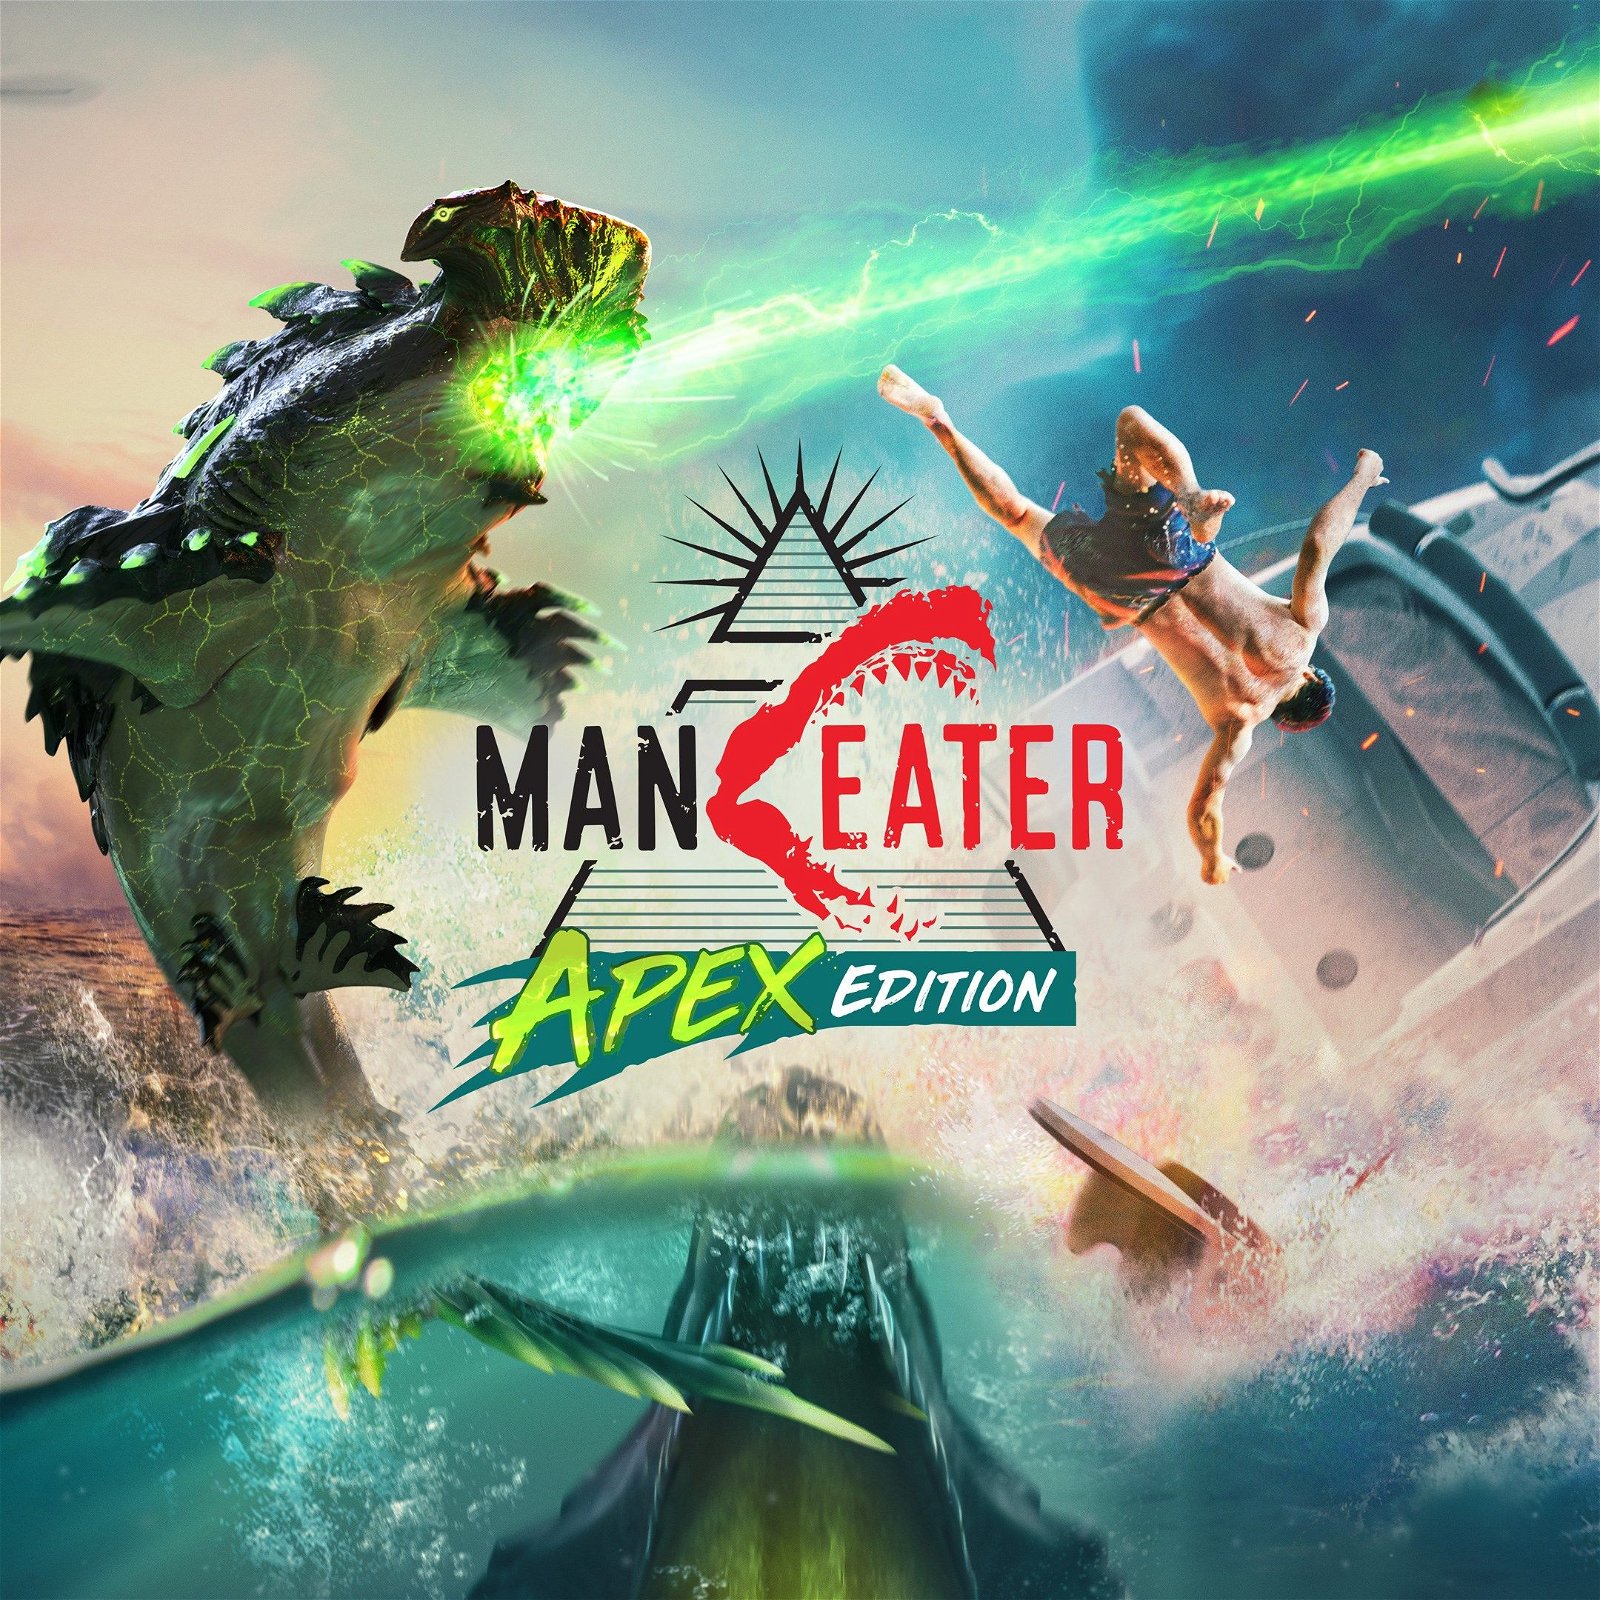 Image of Maneater Apex Edition